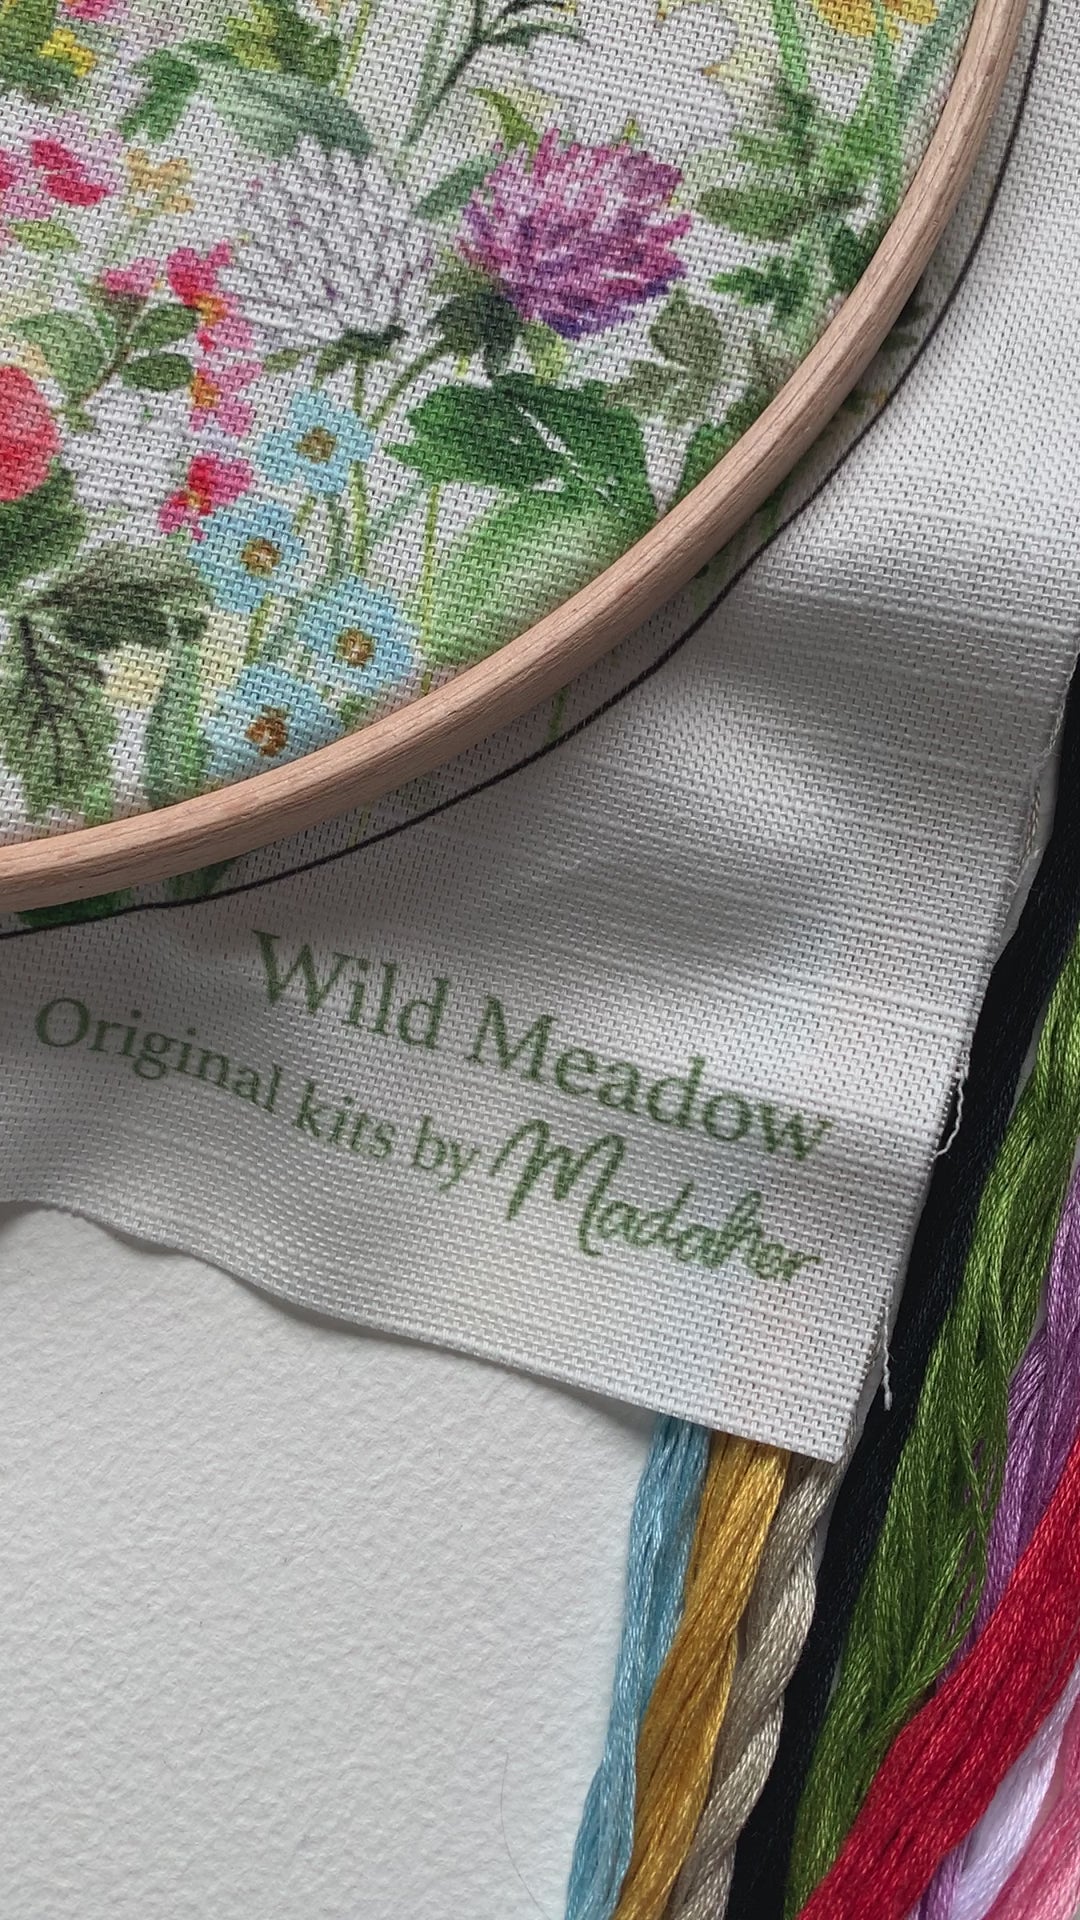 PRE-ORDER Wild Meadow embroidery kit.